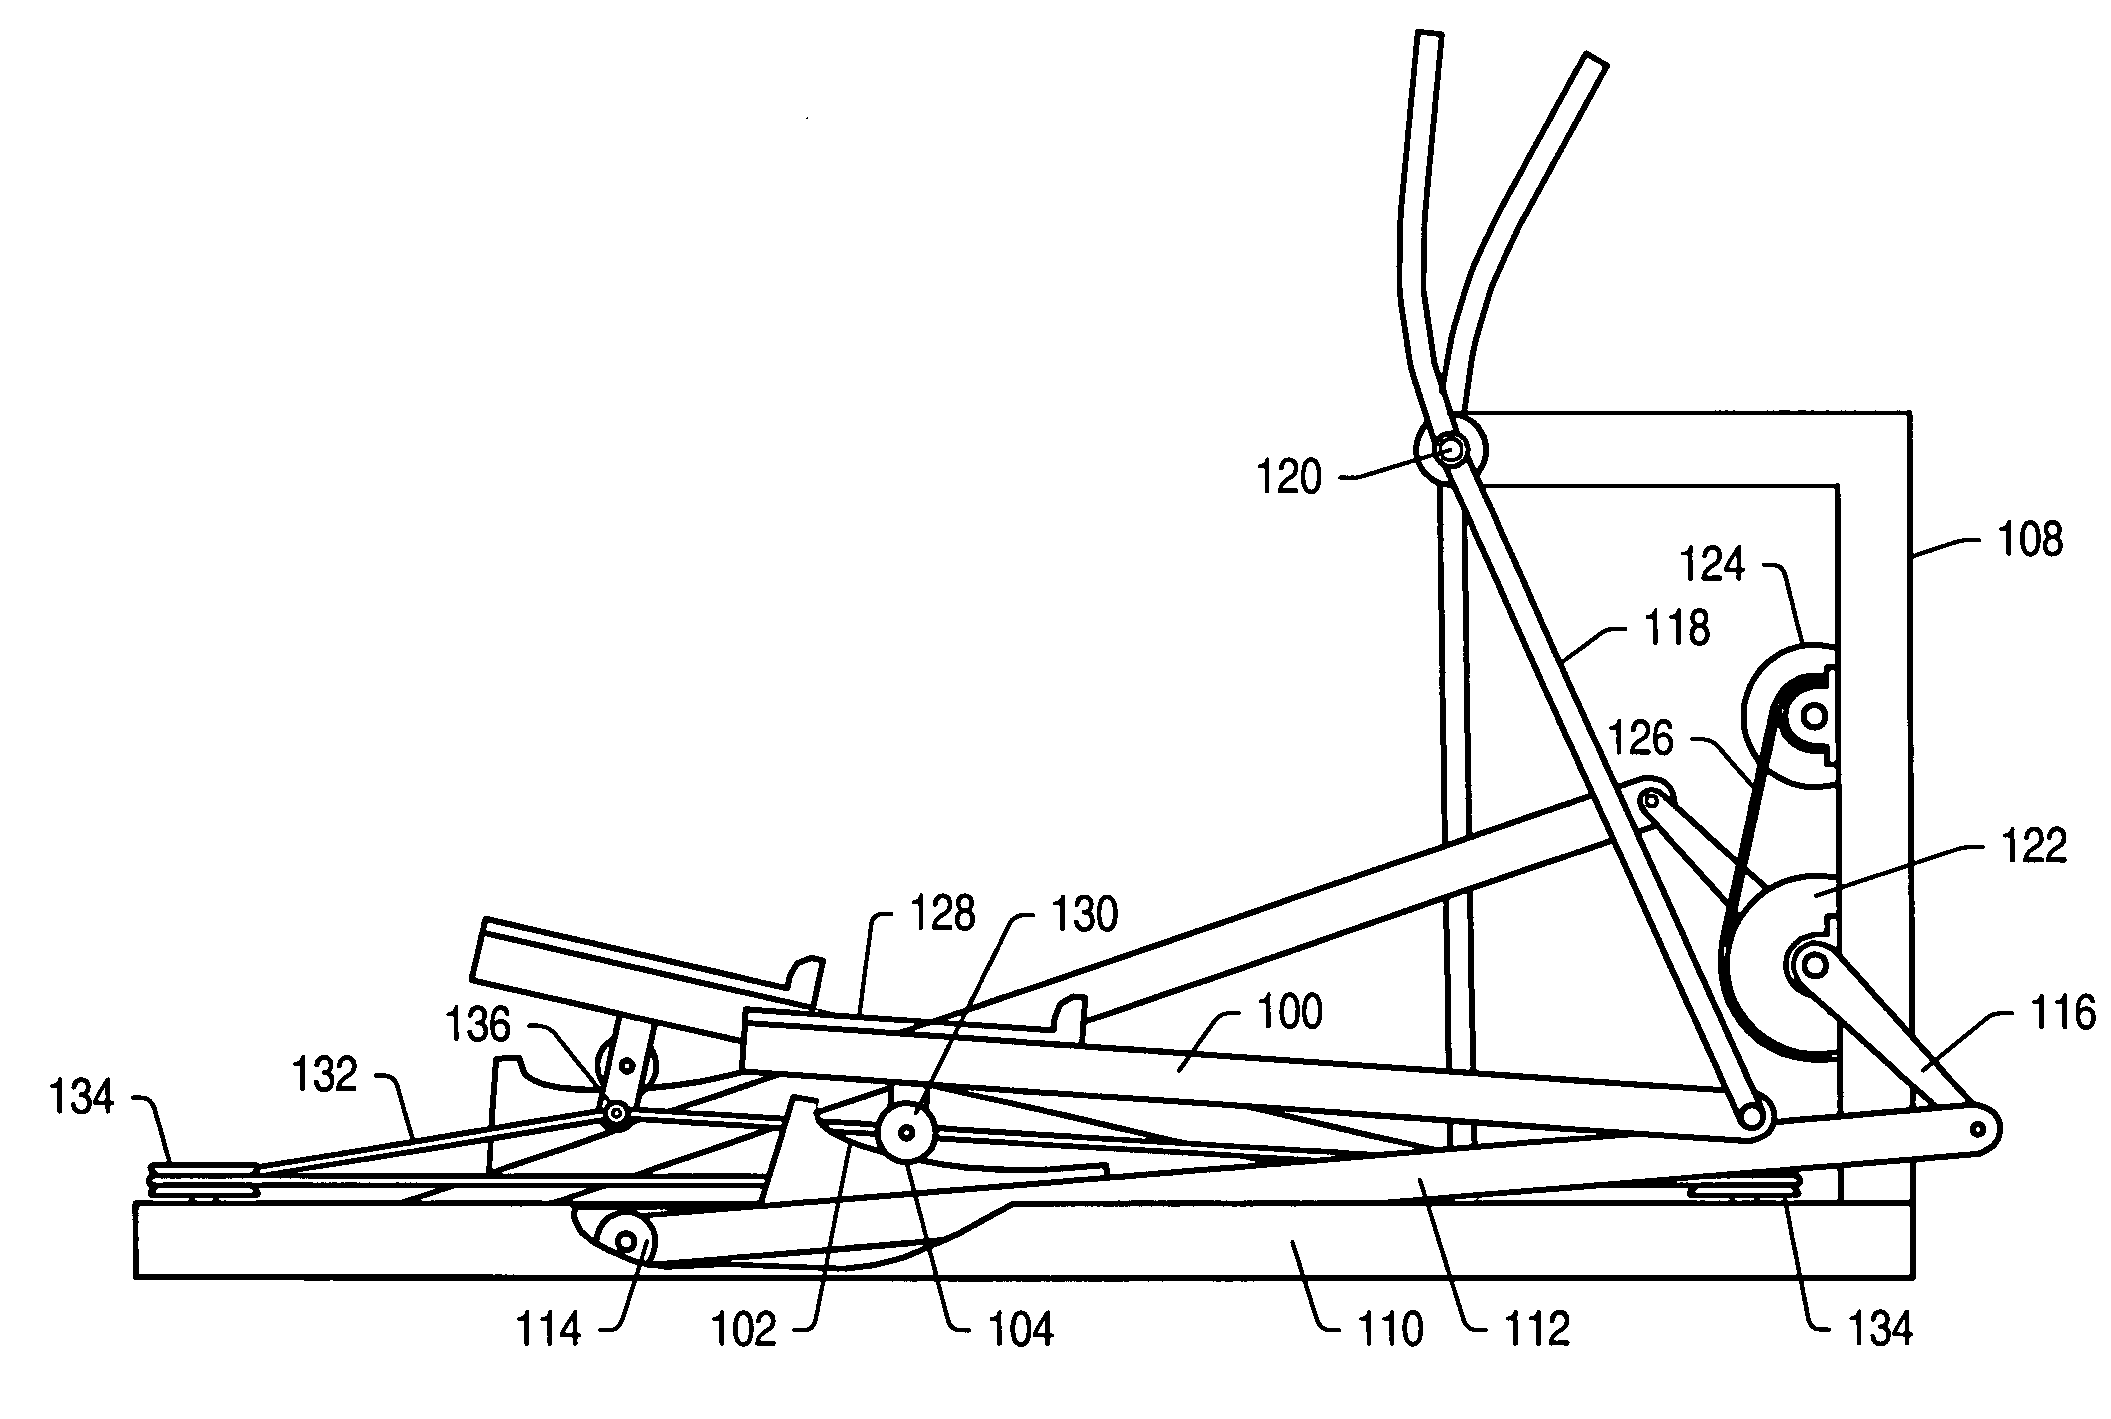 Variable stride exercise apparatus